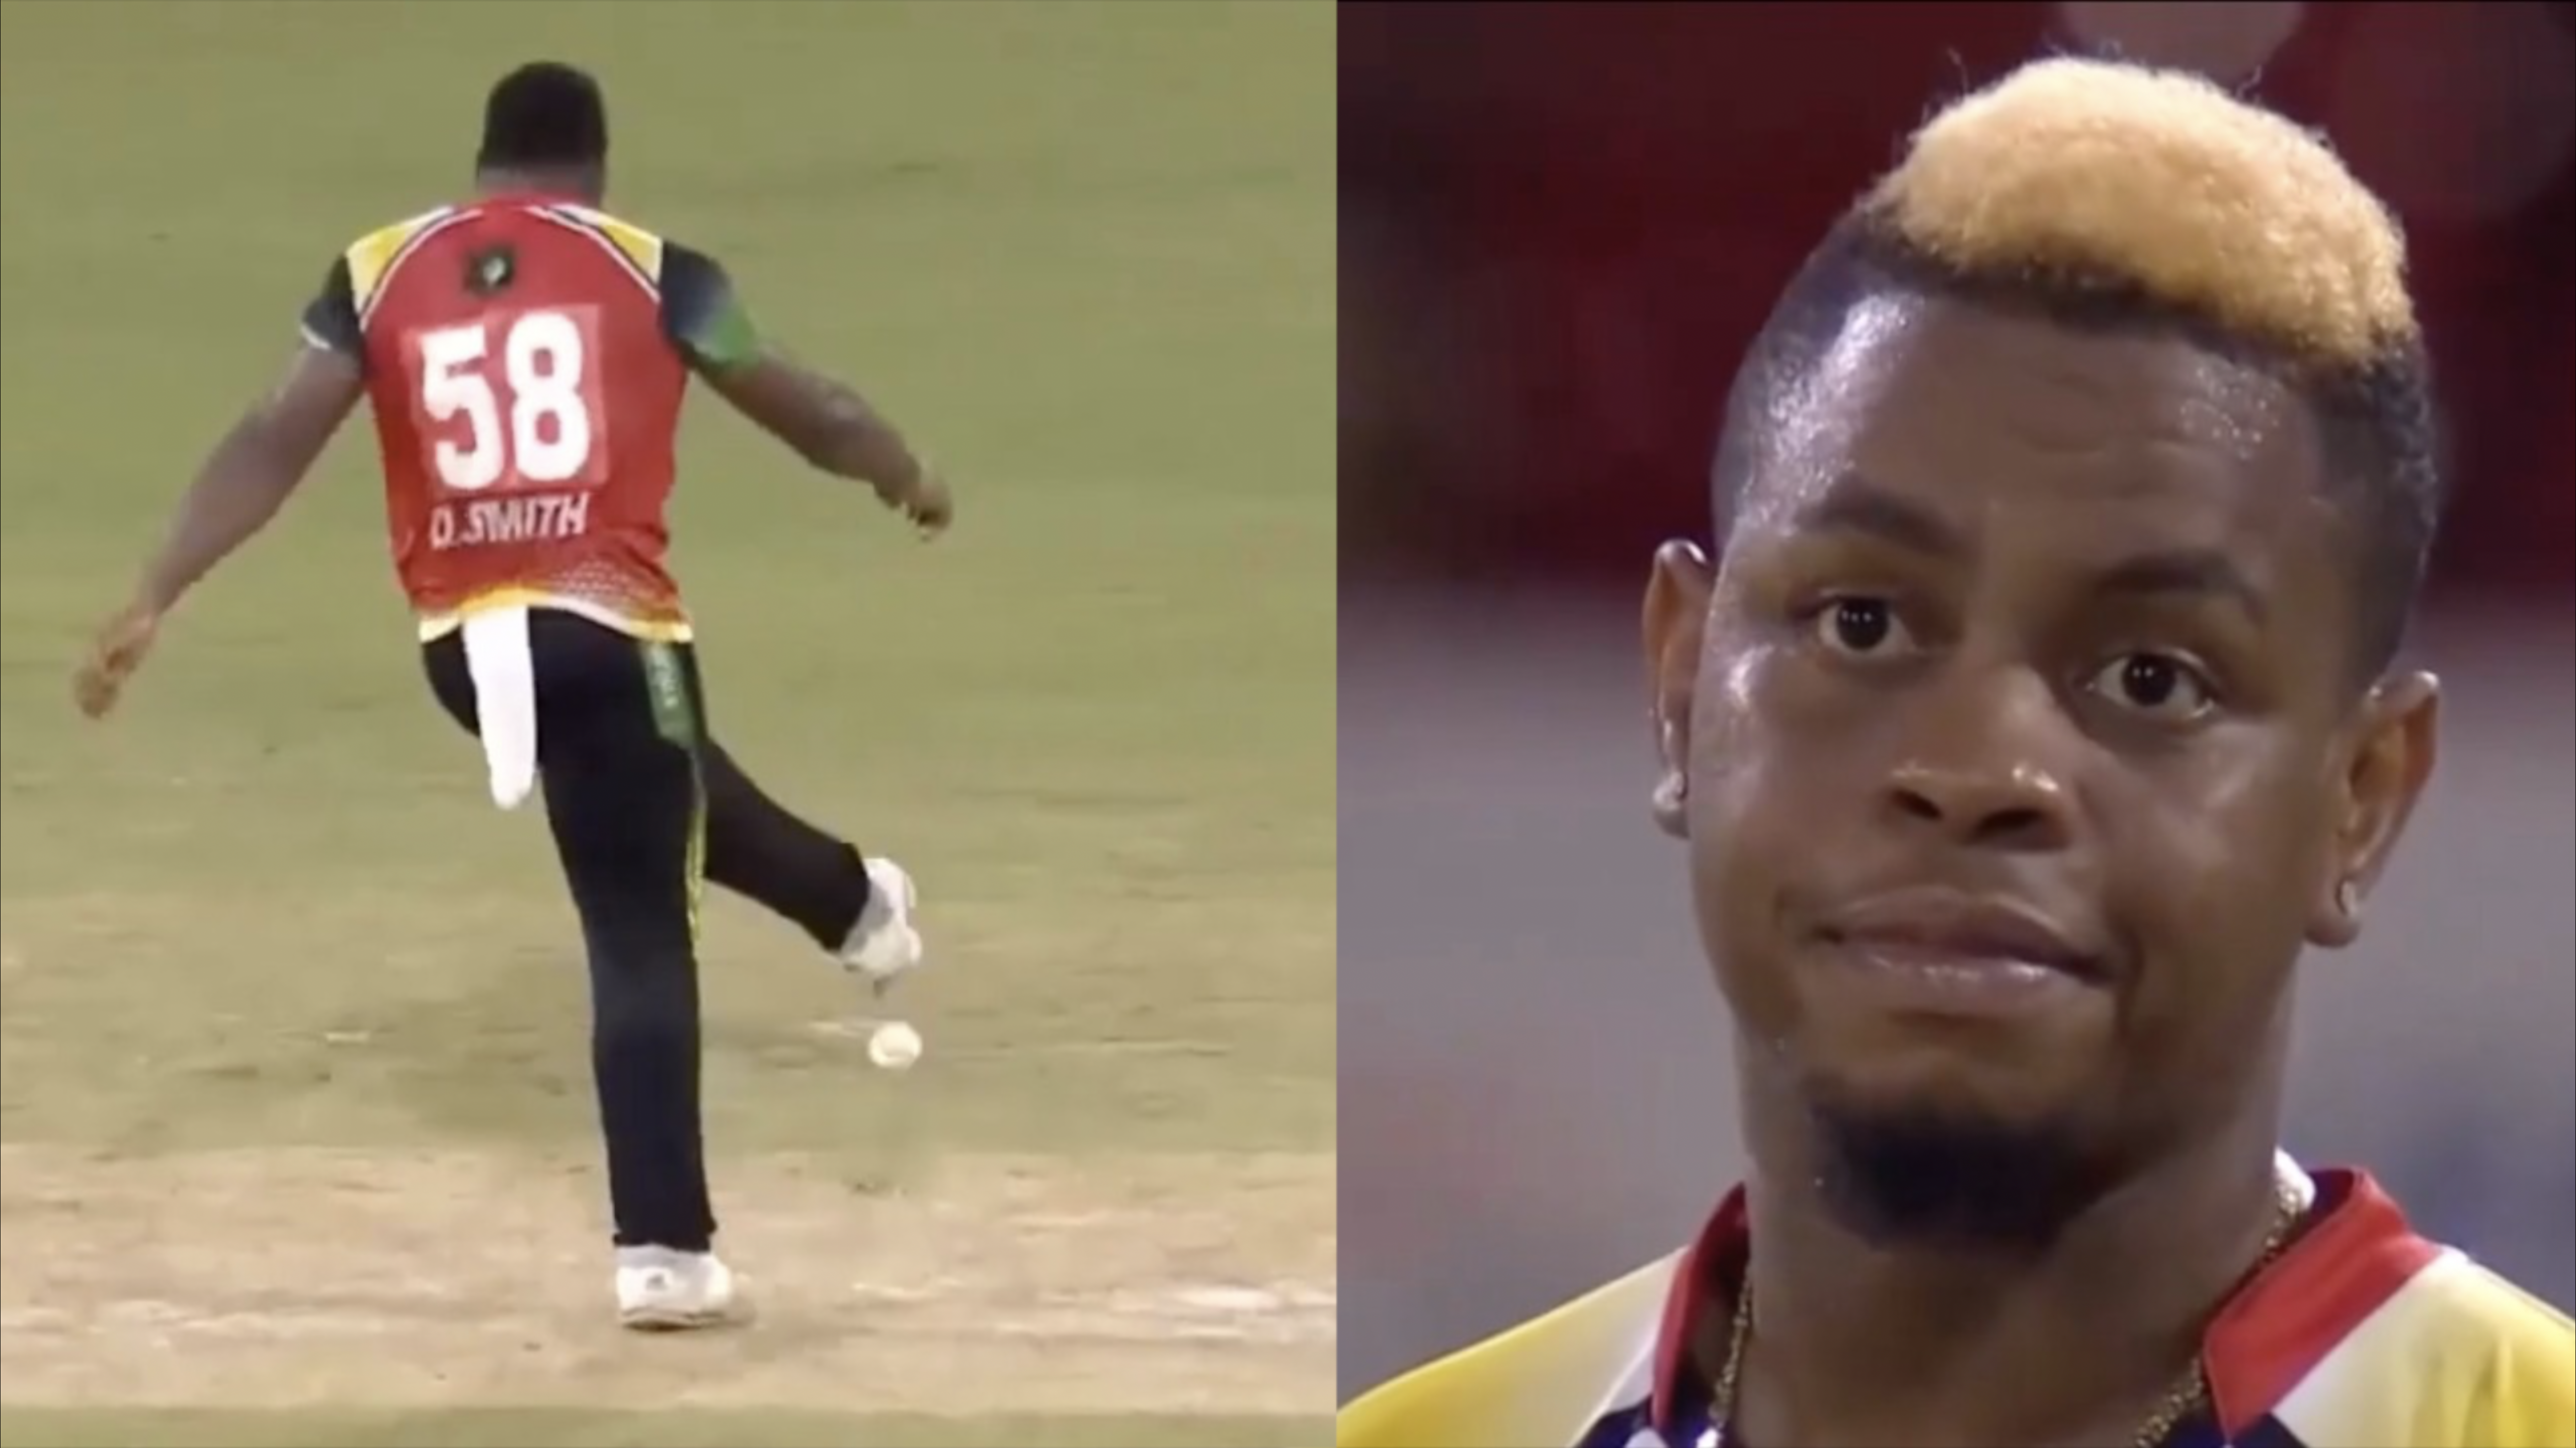 Comedy of errors! Odean Smith stuns Hetmyer